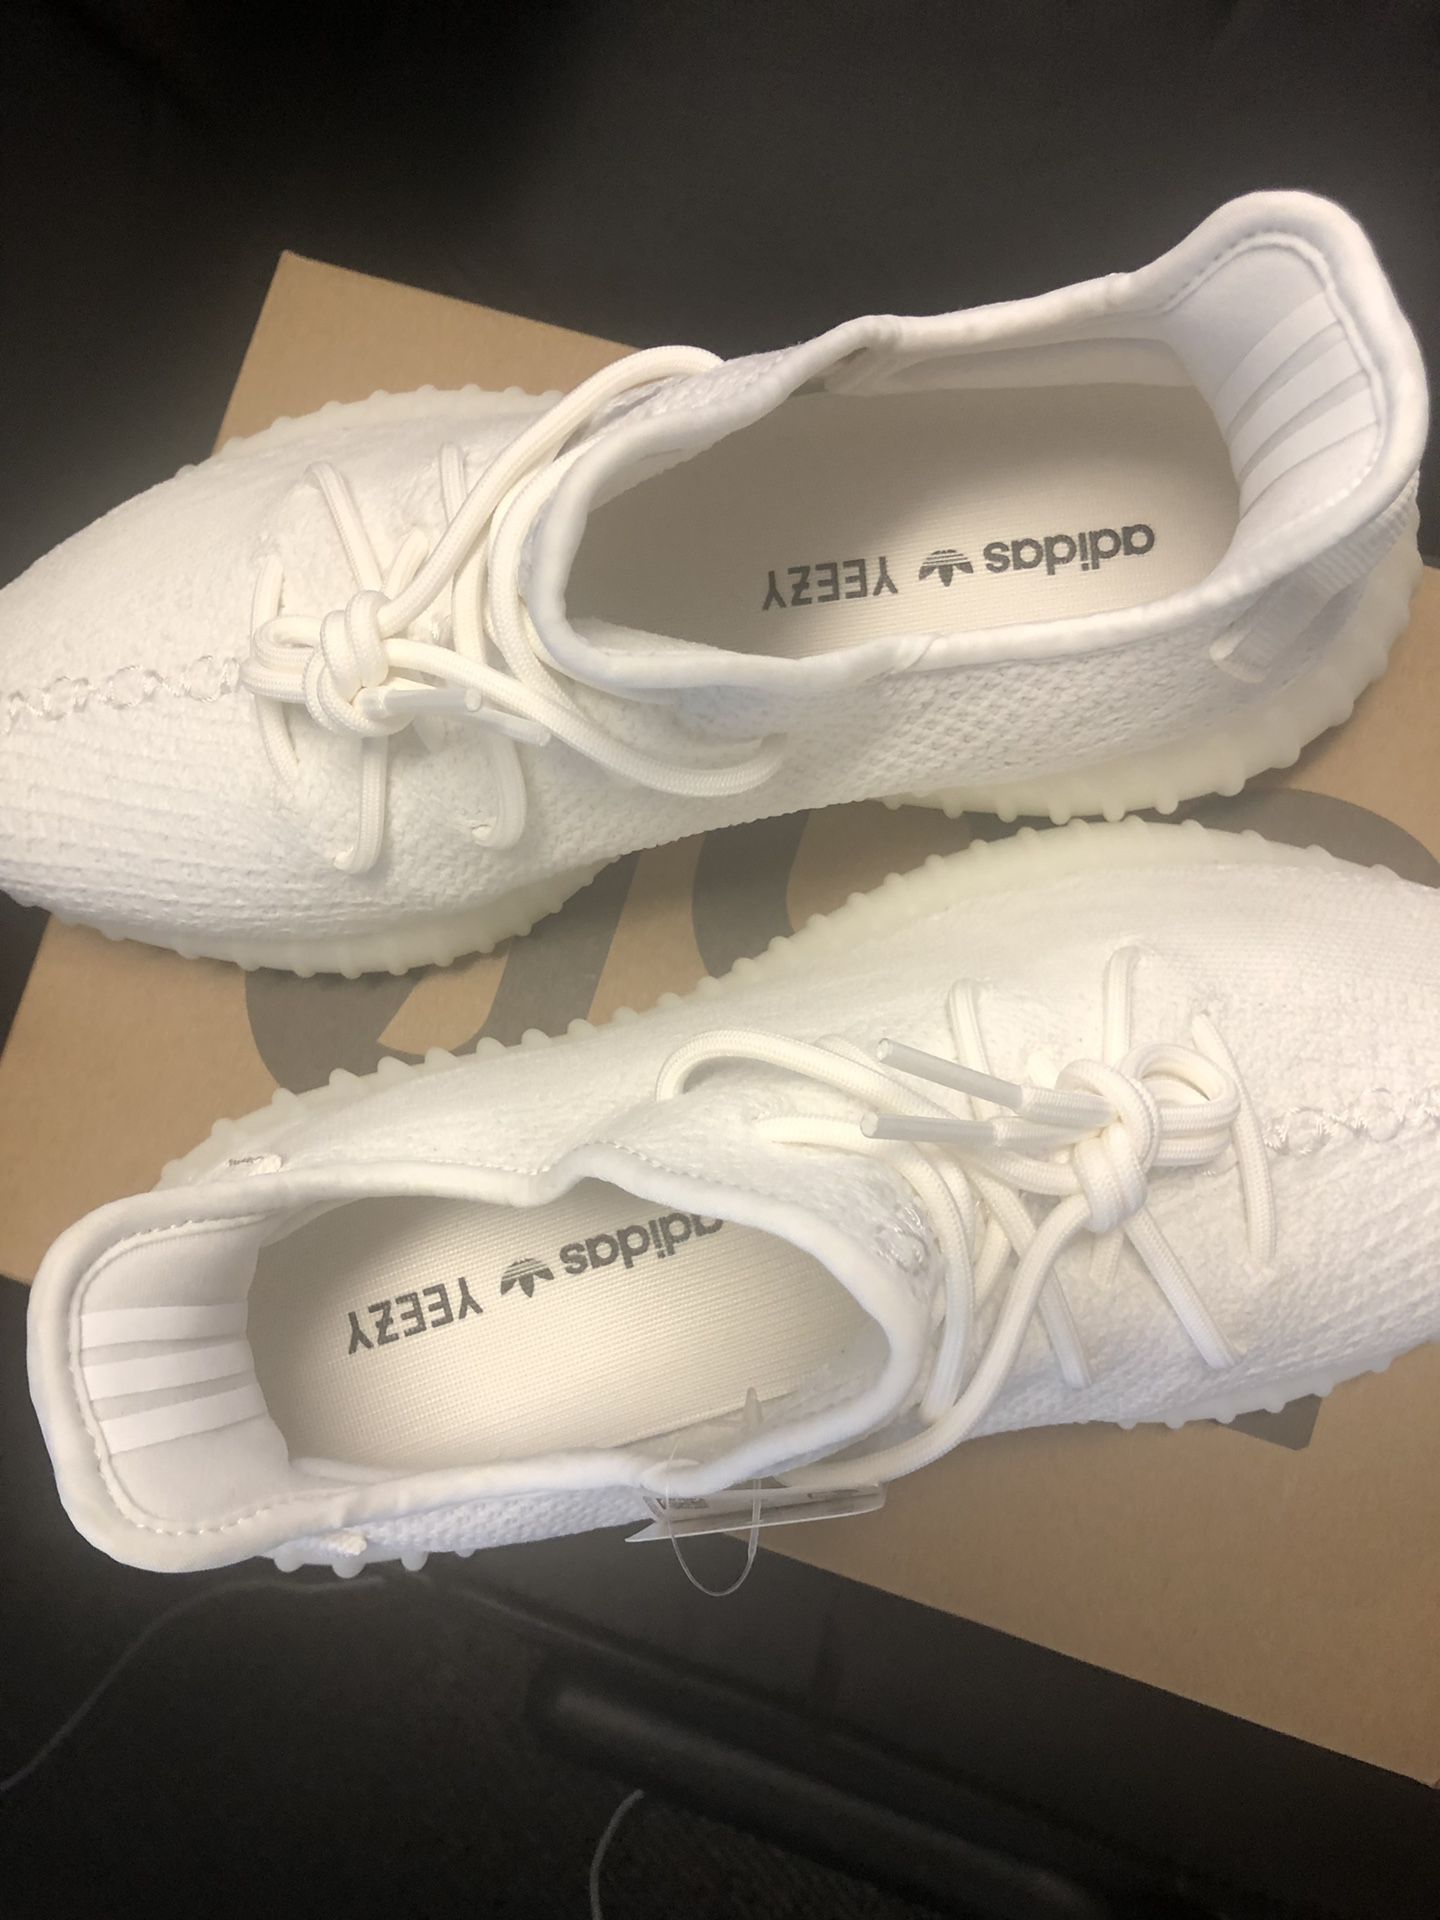 DS Adidas Yeezy Boost 350s Triple White size 10